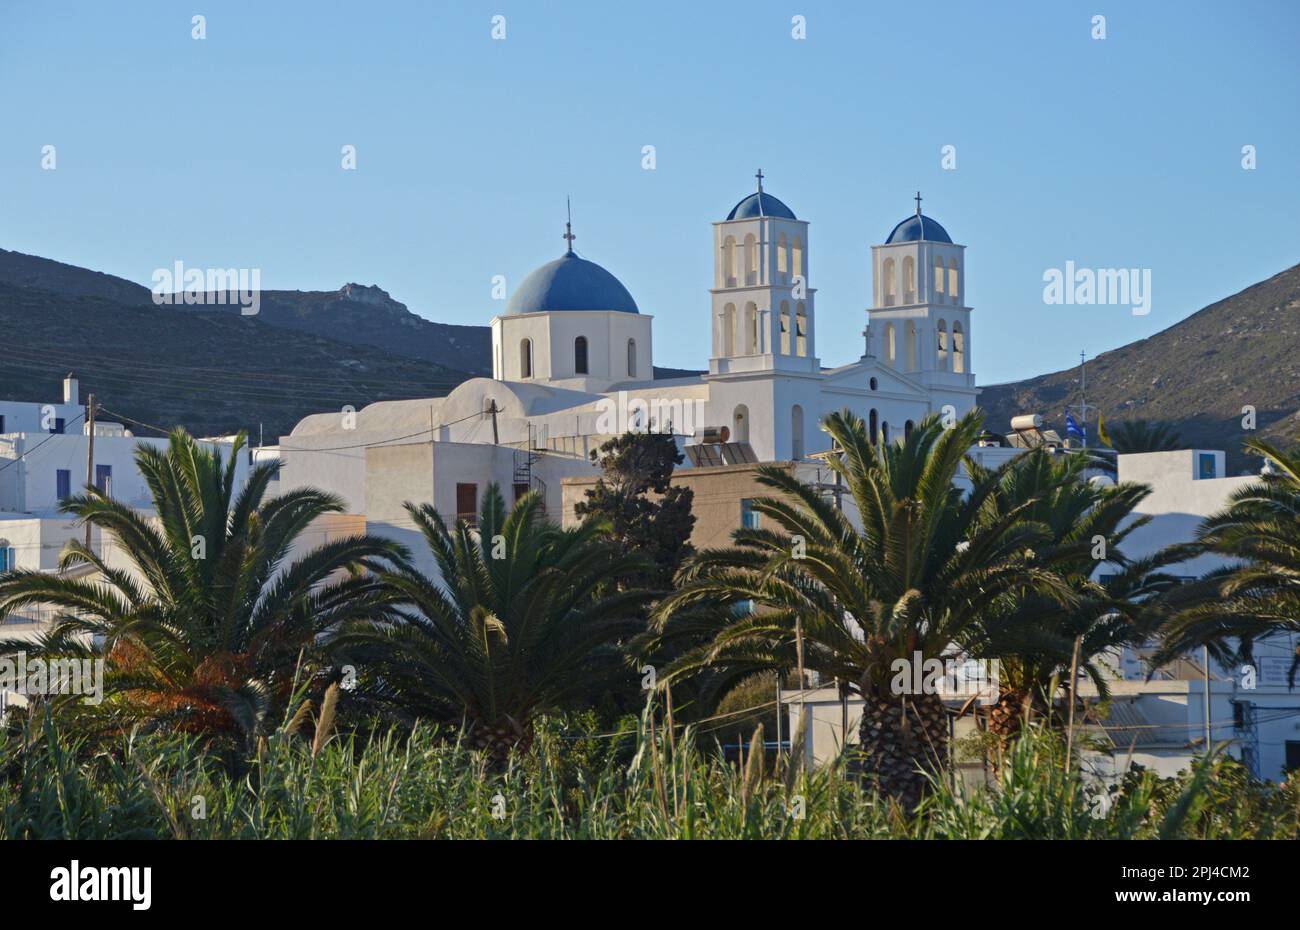 Greece, Island of Amorgos:  early morning view of the twin belltowers and dome of the Orthodox church at Katapola. Stock Photo